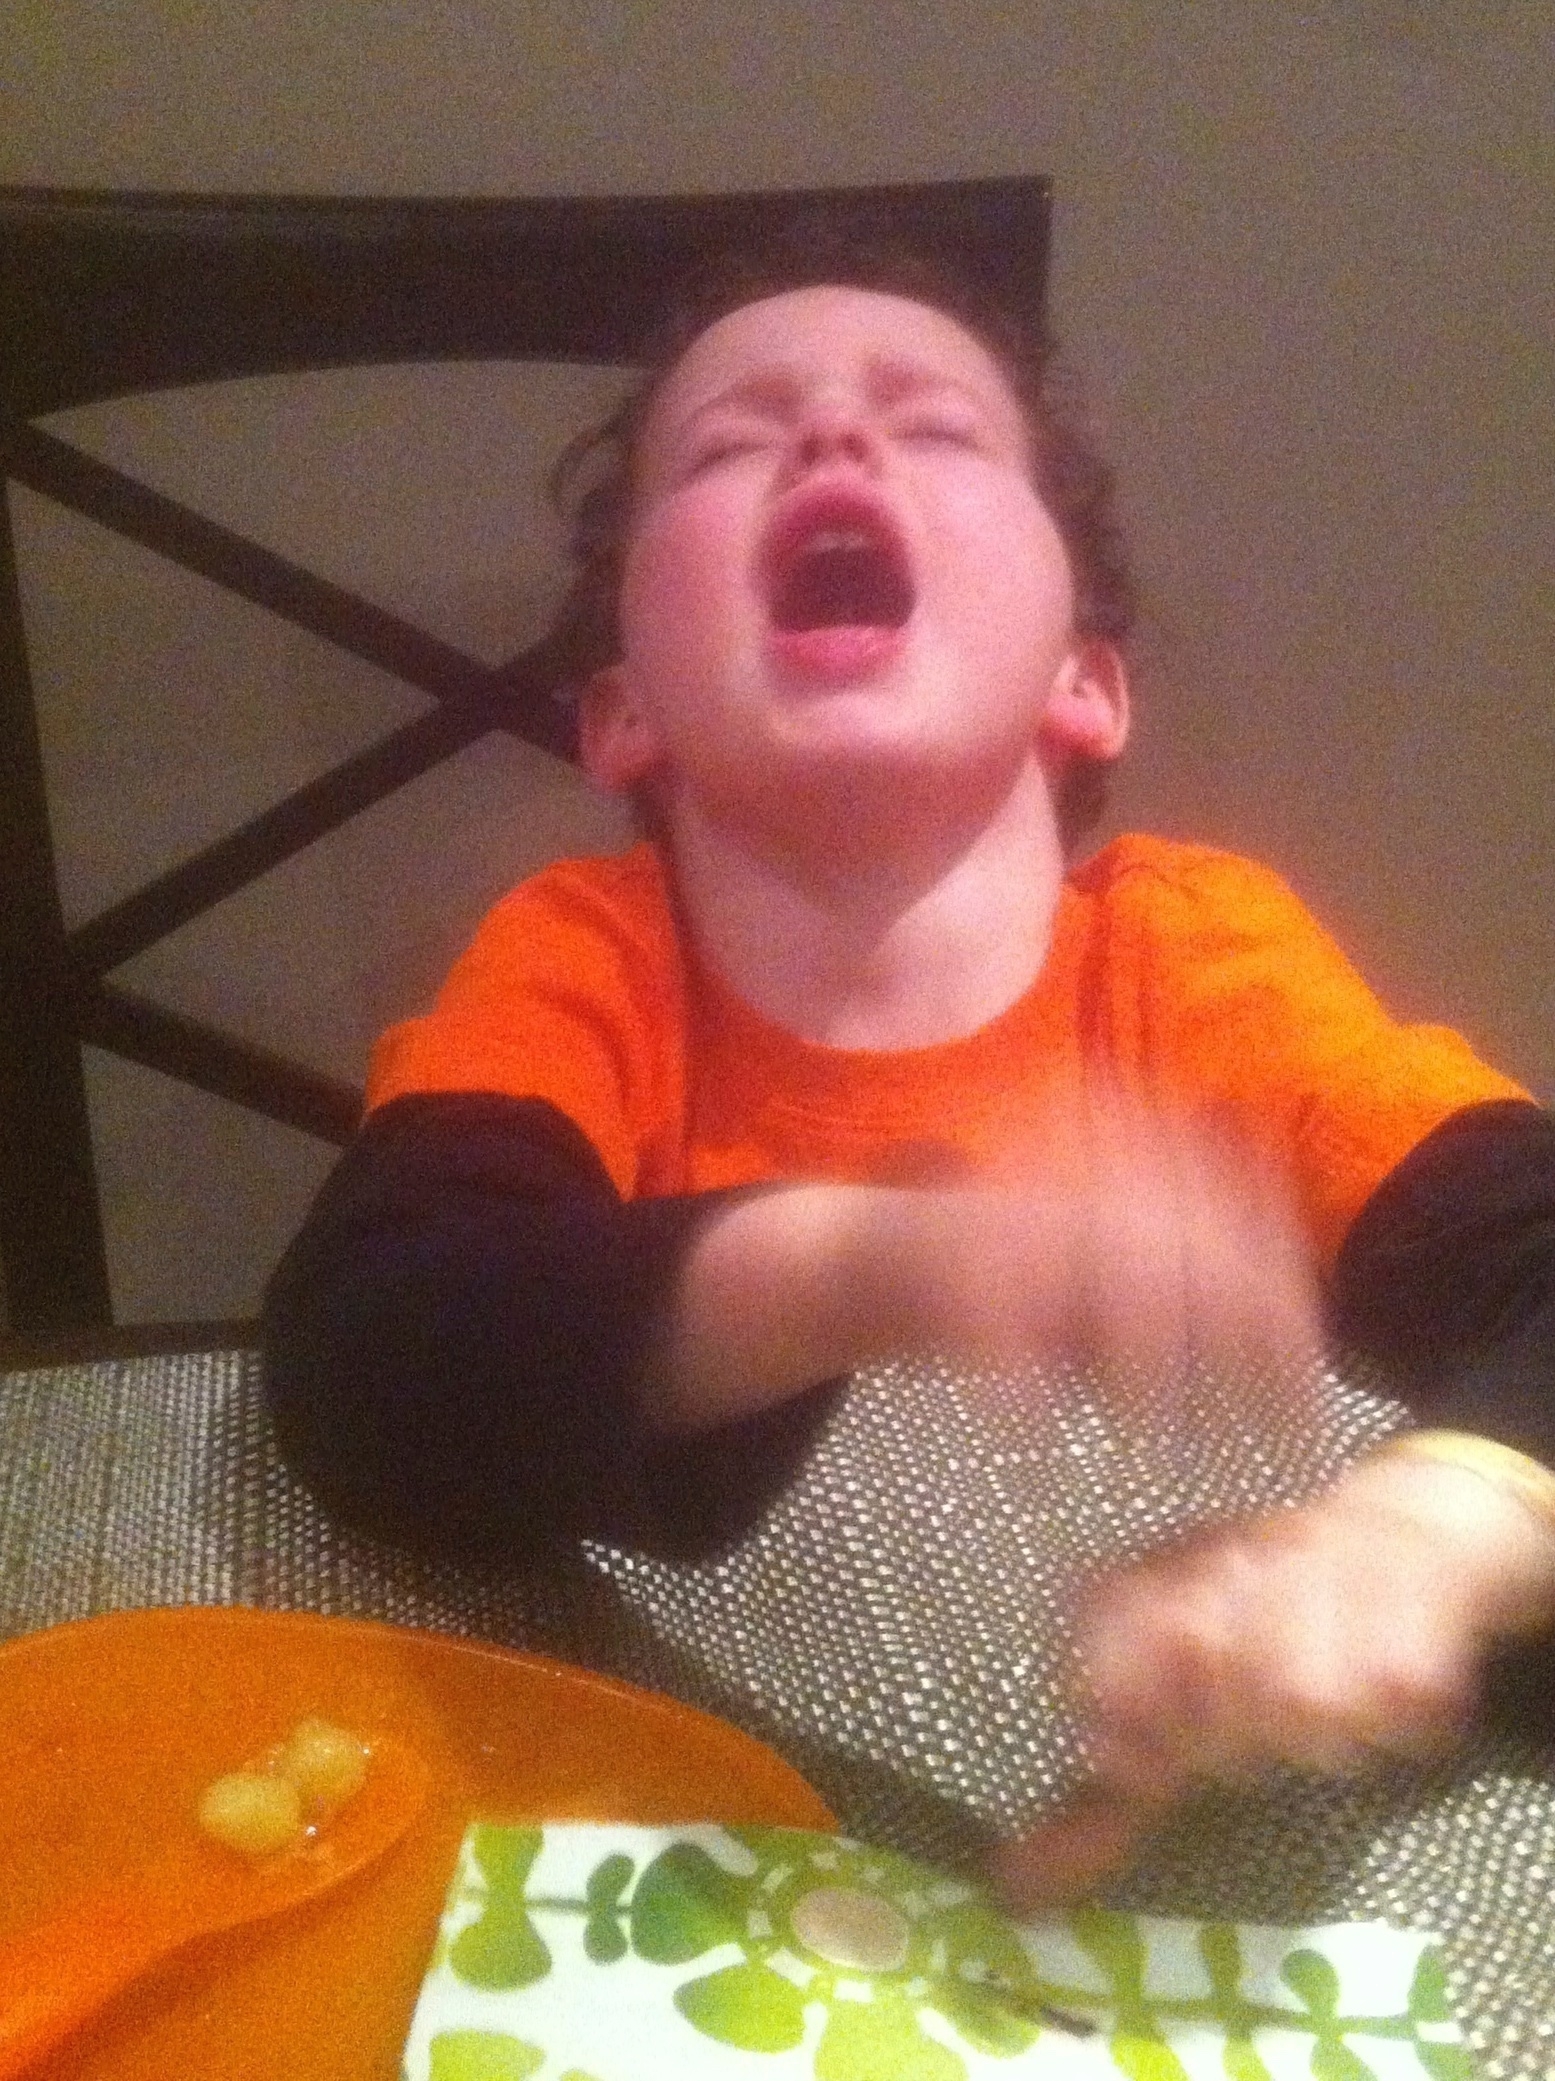 A child is crying at a dining table with a blurred motion of hands, near an orange plate with food remnants.